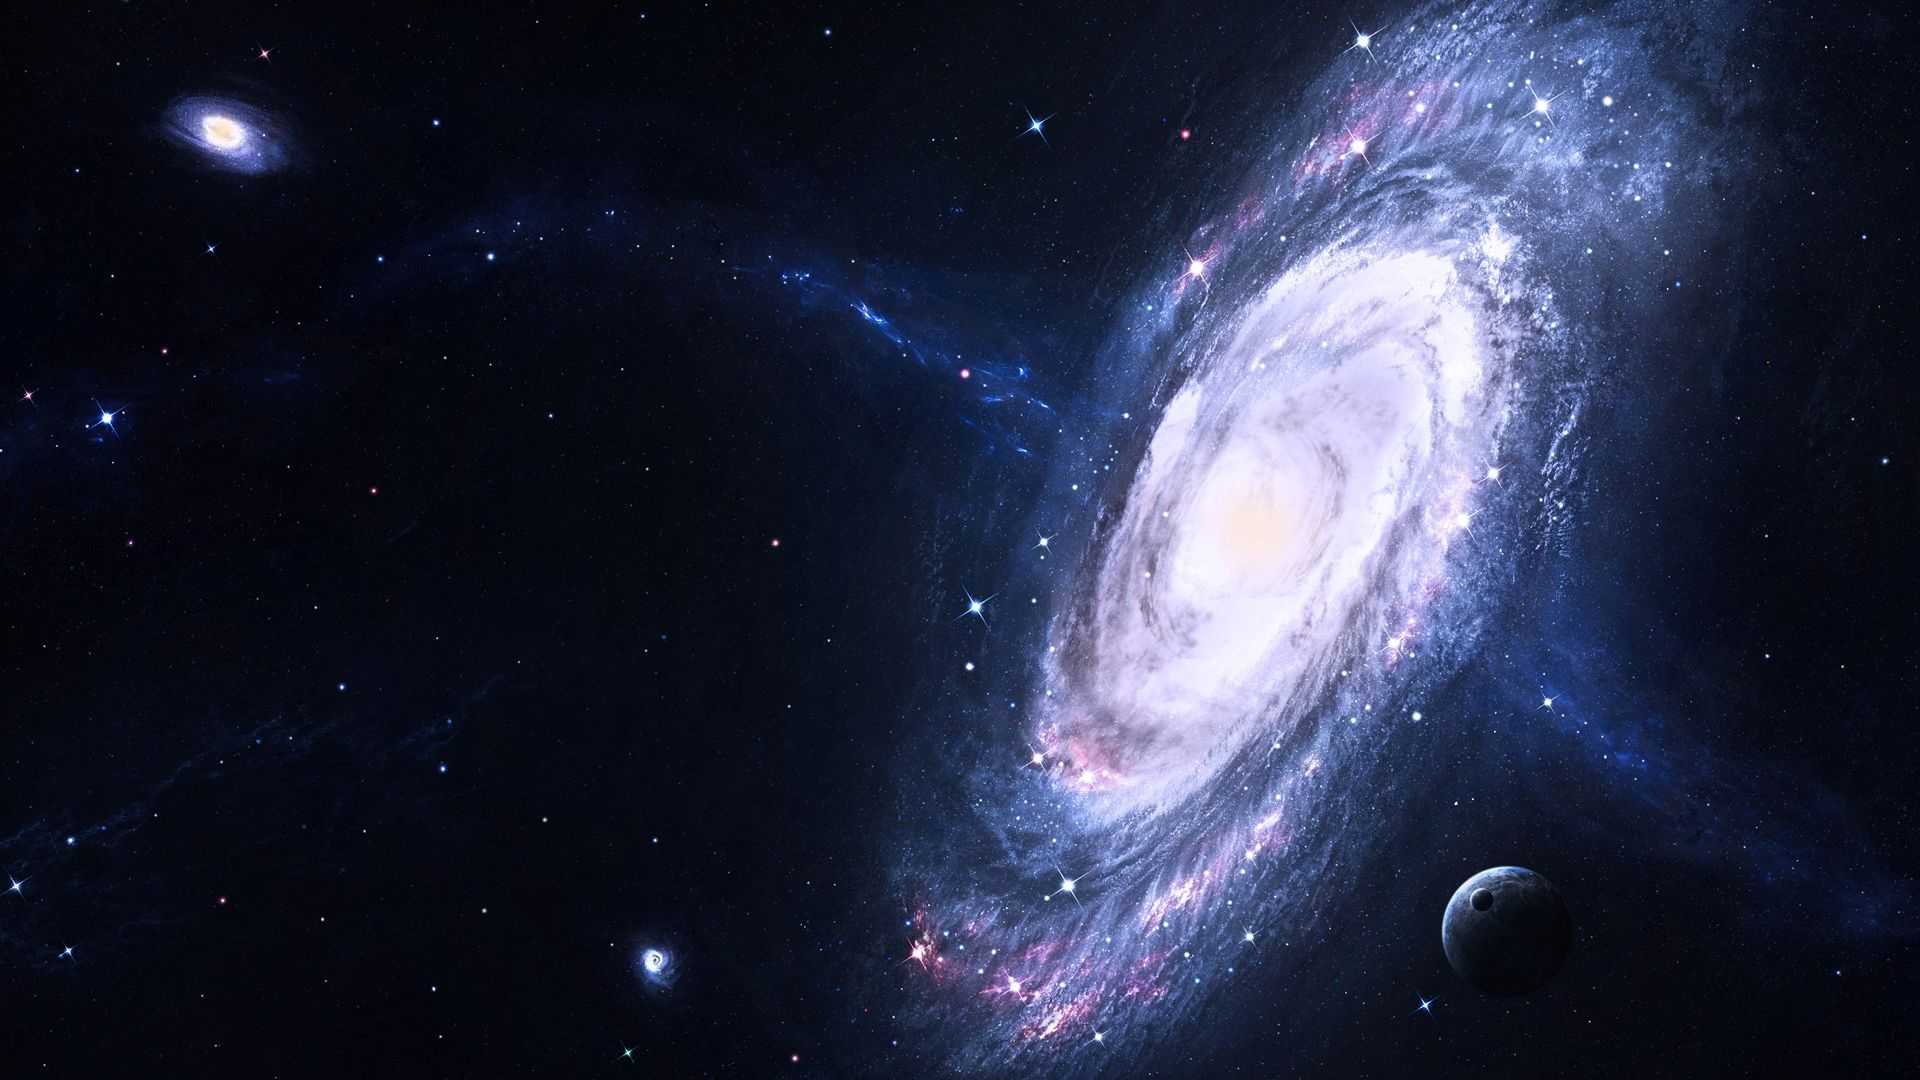 1920x1080 Desktop Wallpaper Spiral Galaxy In Space, Hd Image, Picture, Background, Vy7azp